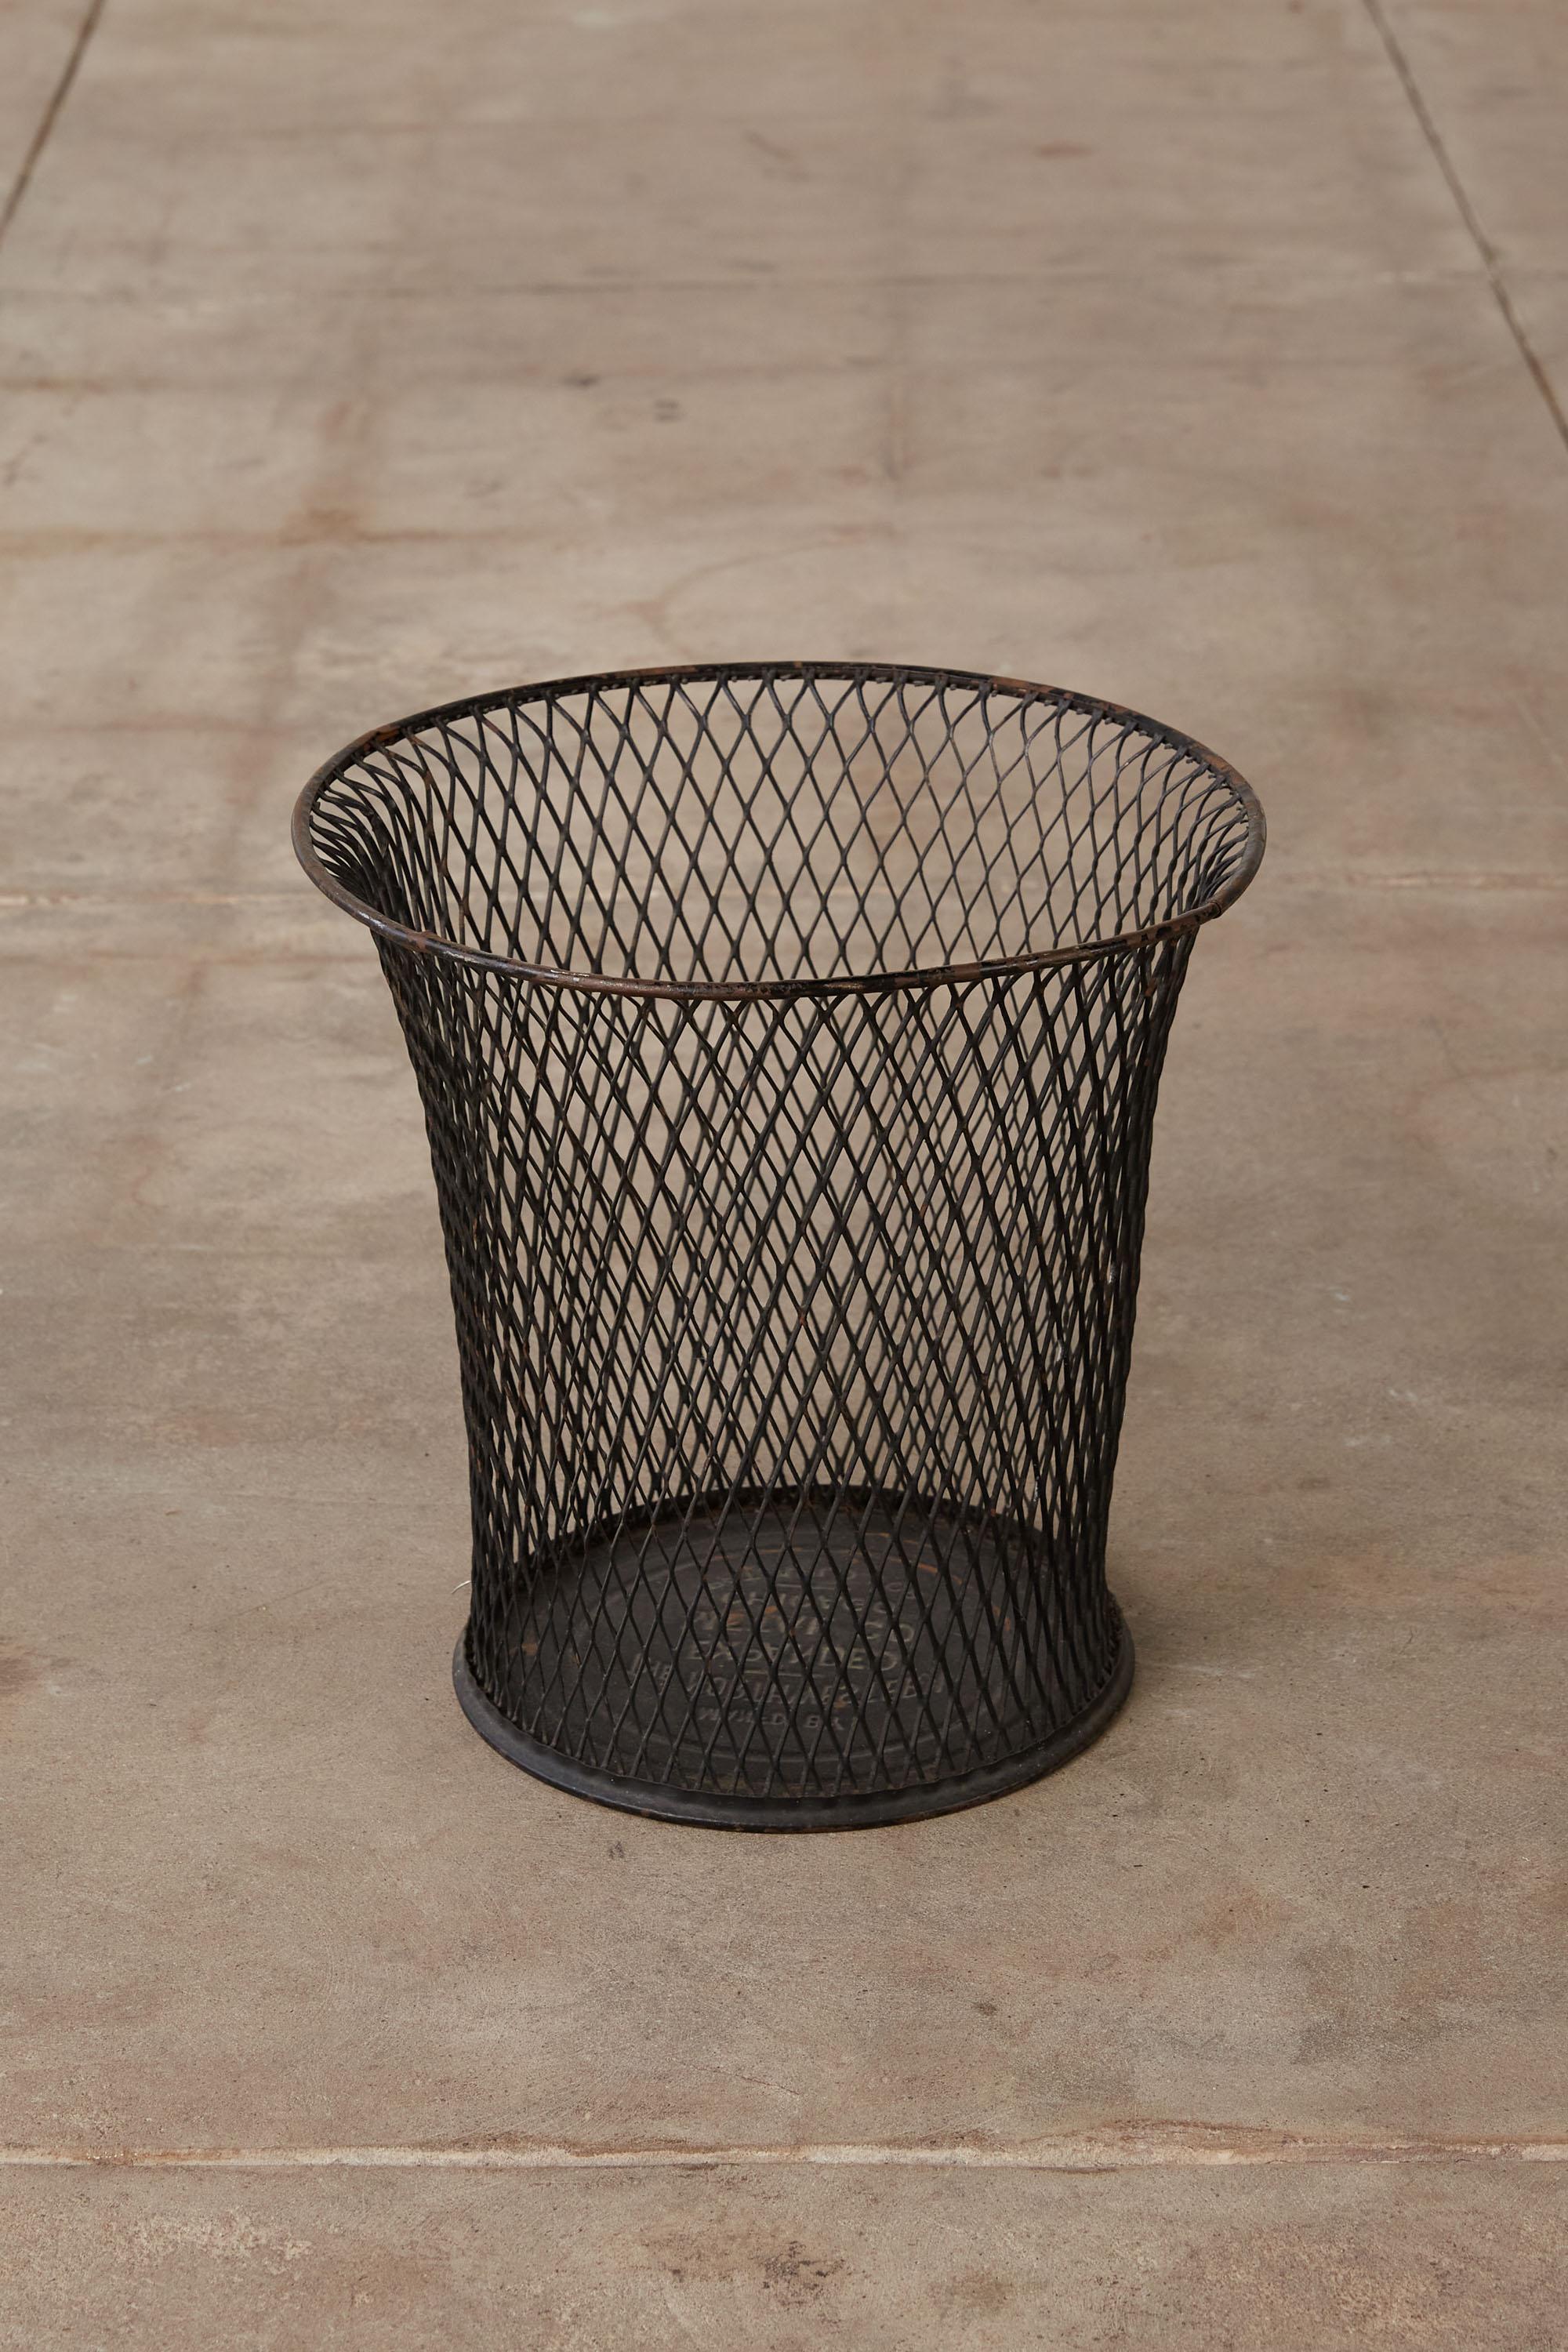 A wire mesh waste basket by Northwestern Expanded Metal Company, Chicago, c. 1930's. This piece is a staple of any midcentury office, holds all of your office waste and is stylish while doing so. It features an expanded metal body an elegantly